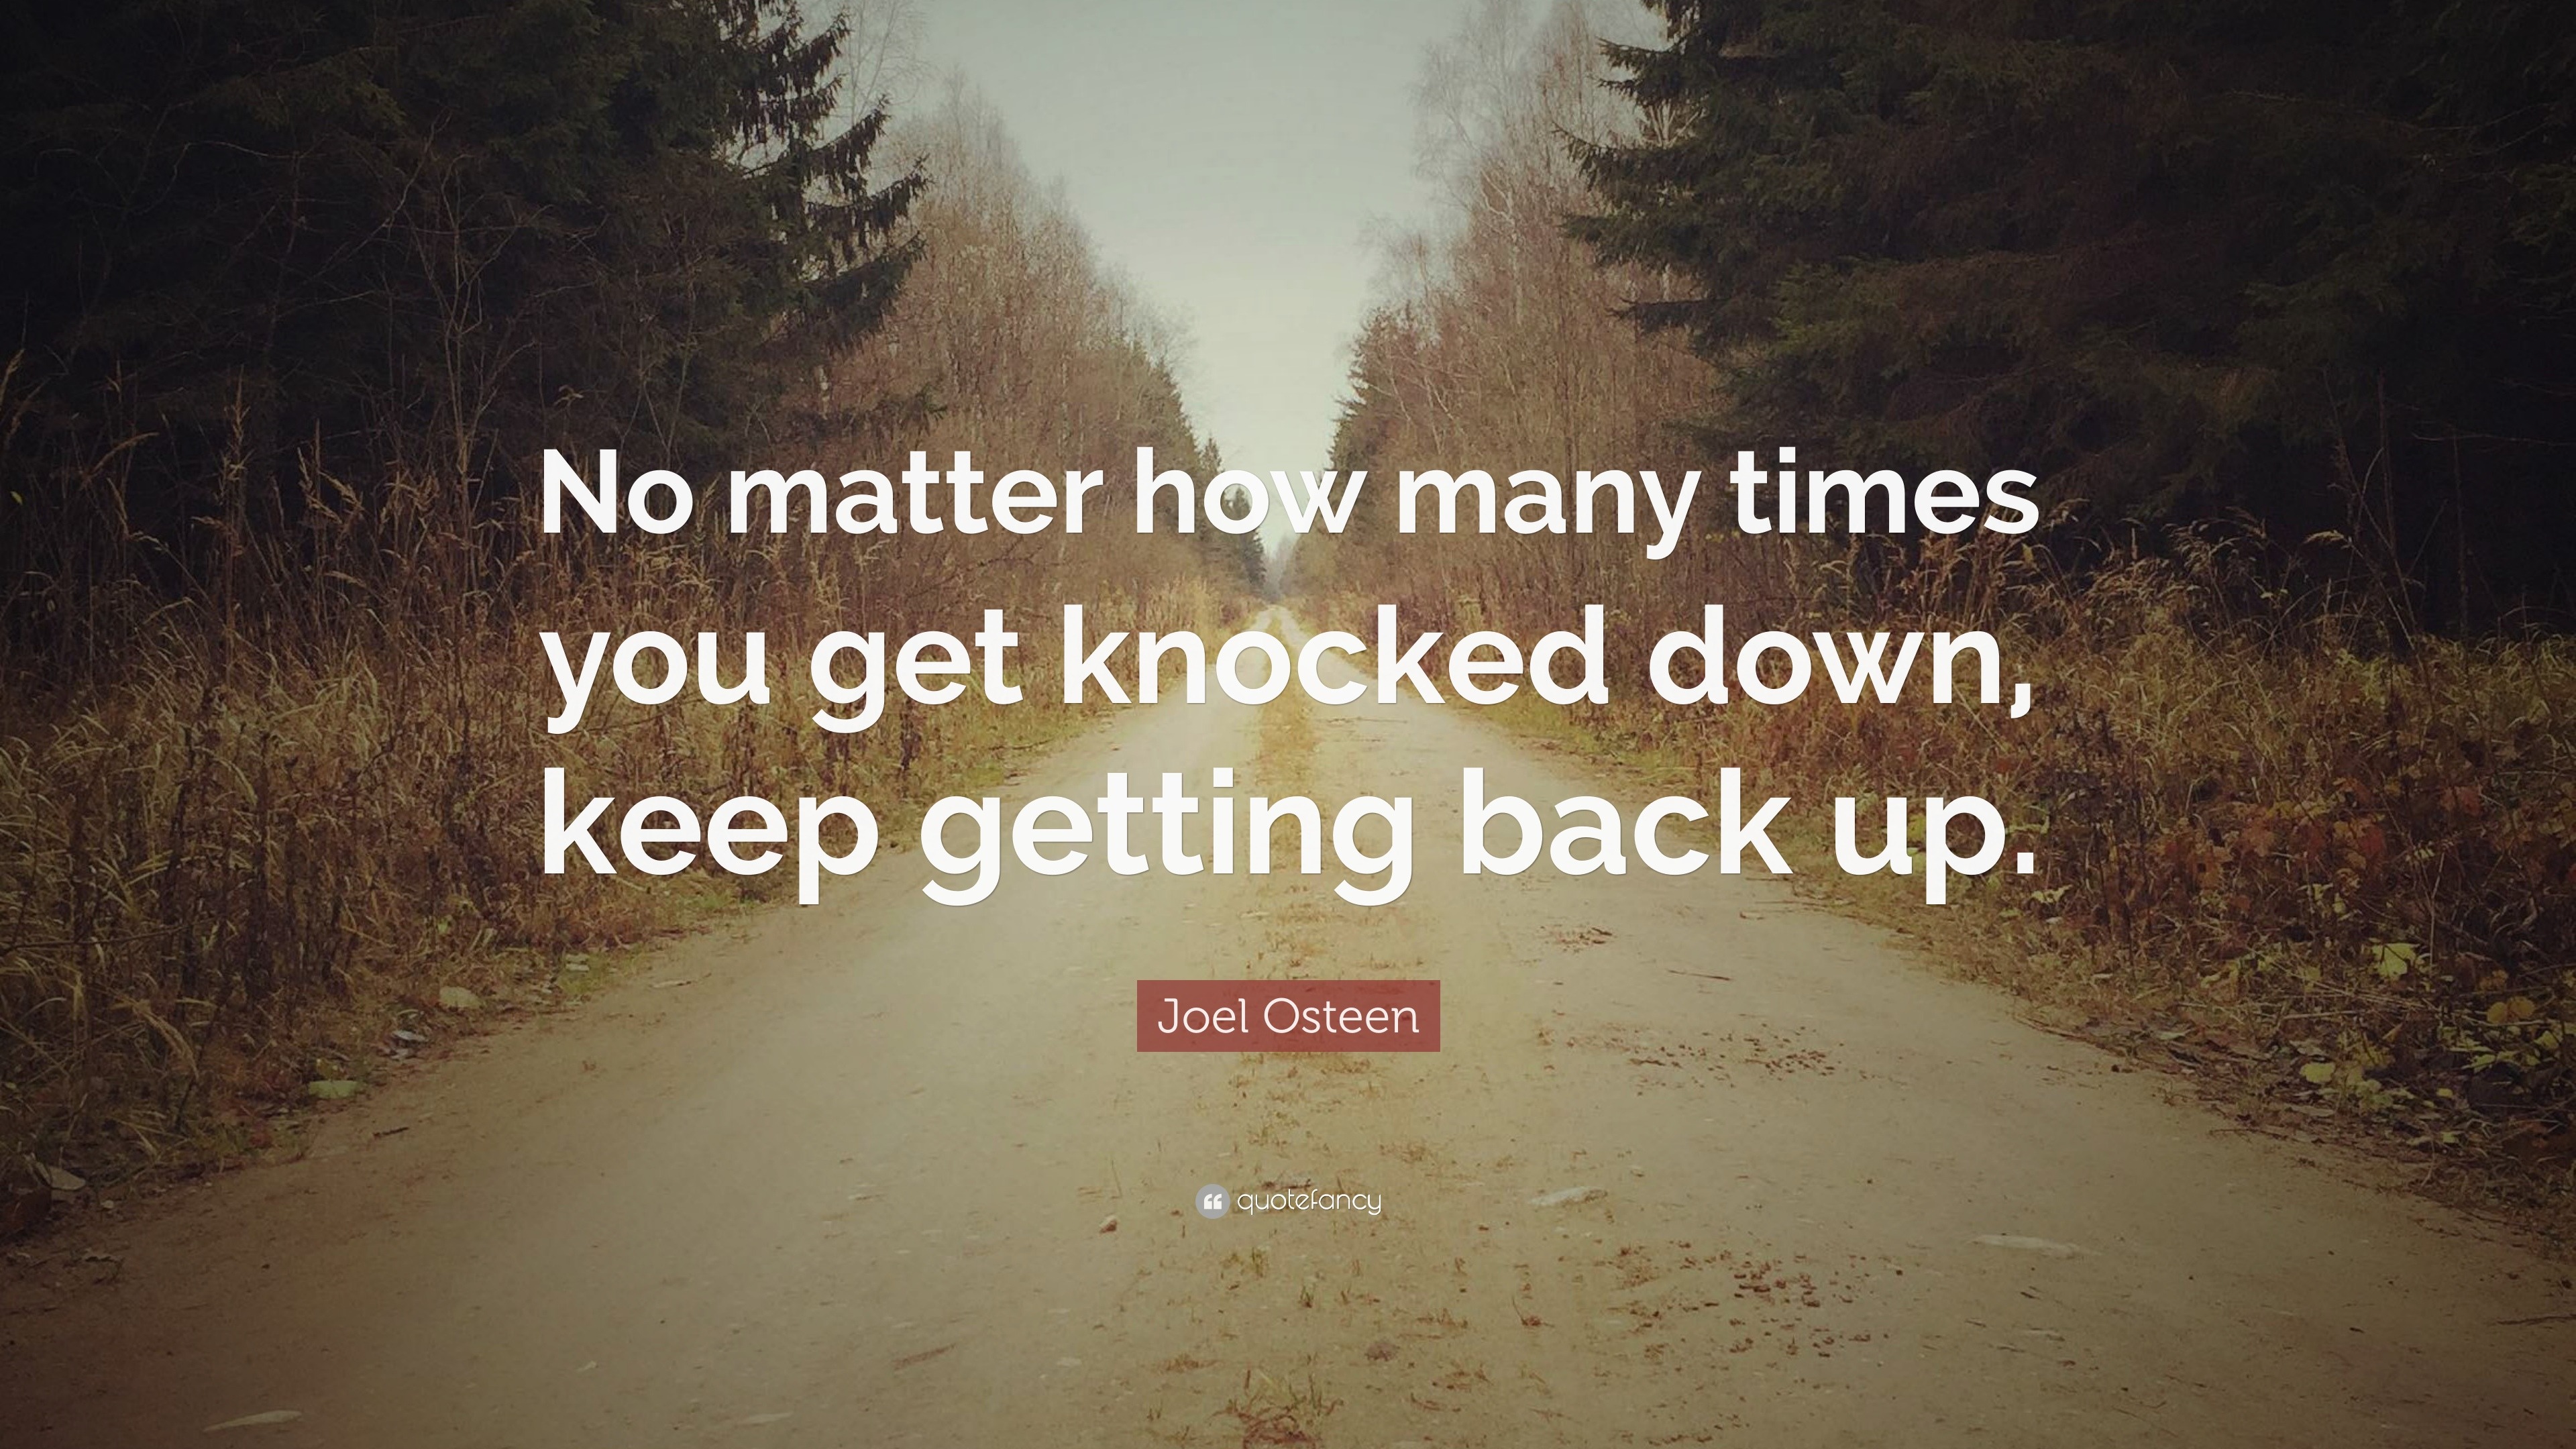 Joel Osteen Quote: “No matter how many times you get knocked down, keep